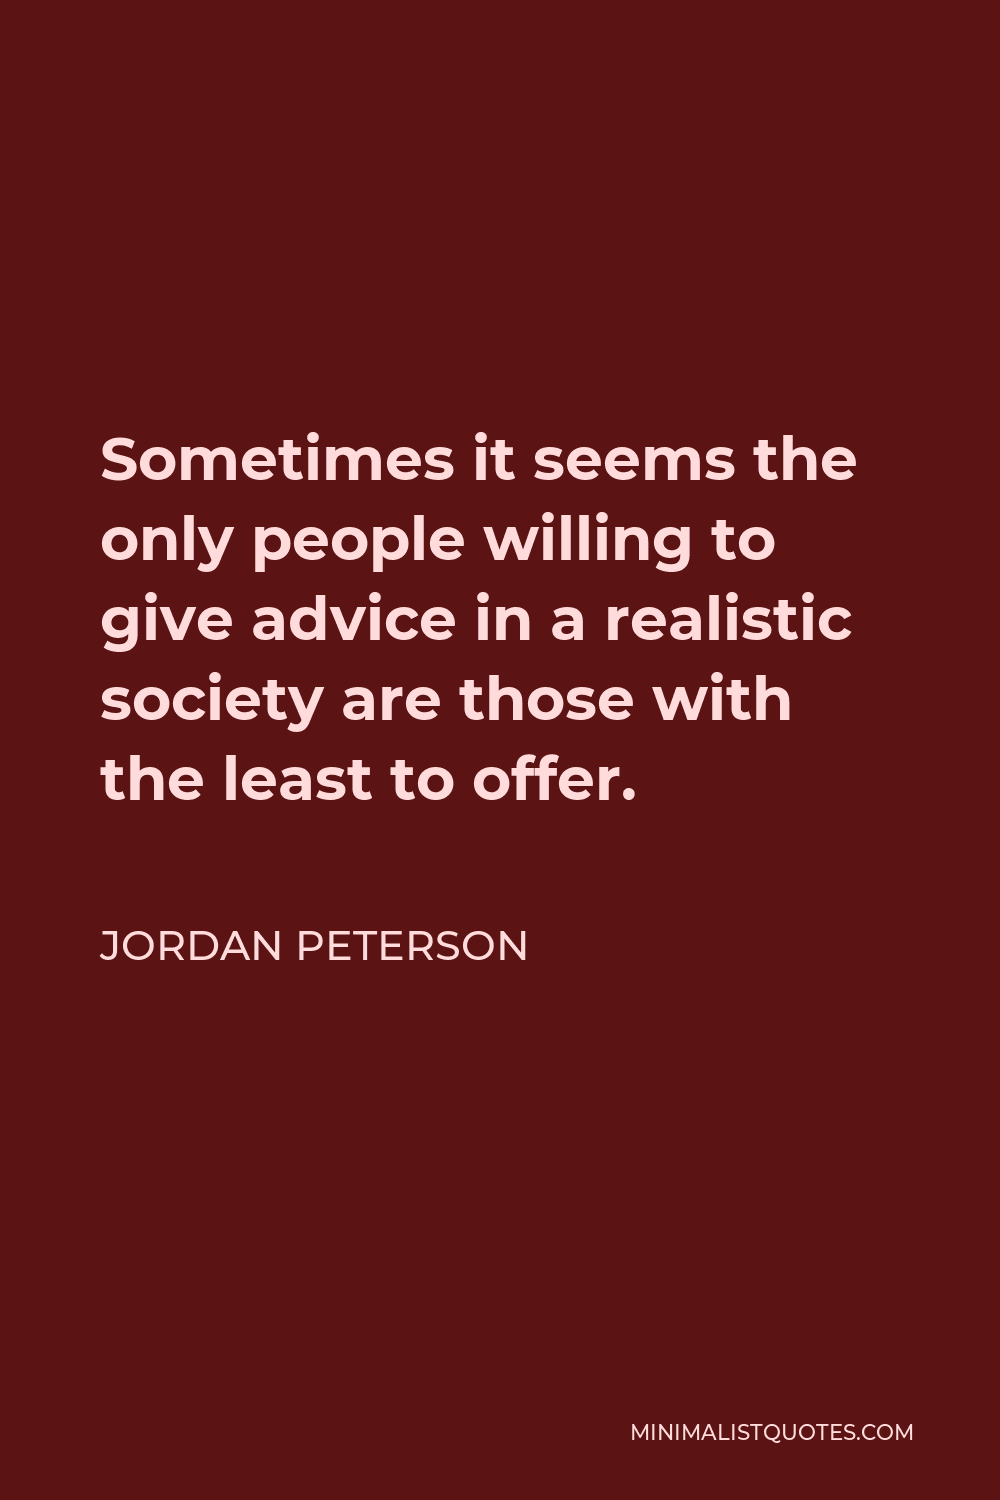 Jordan Peterson Quote - Sometimes it seems the only people willing to give advice in a realistic society are those with the least to offer.